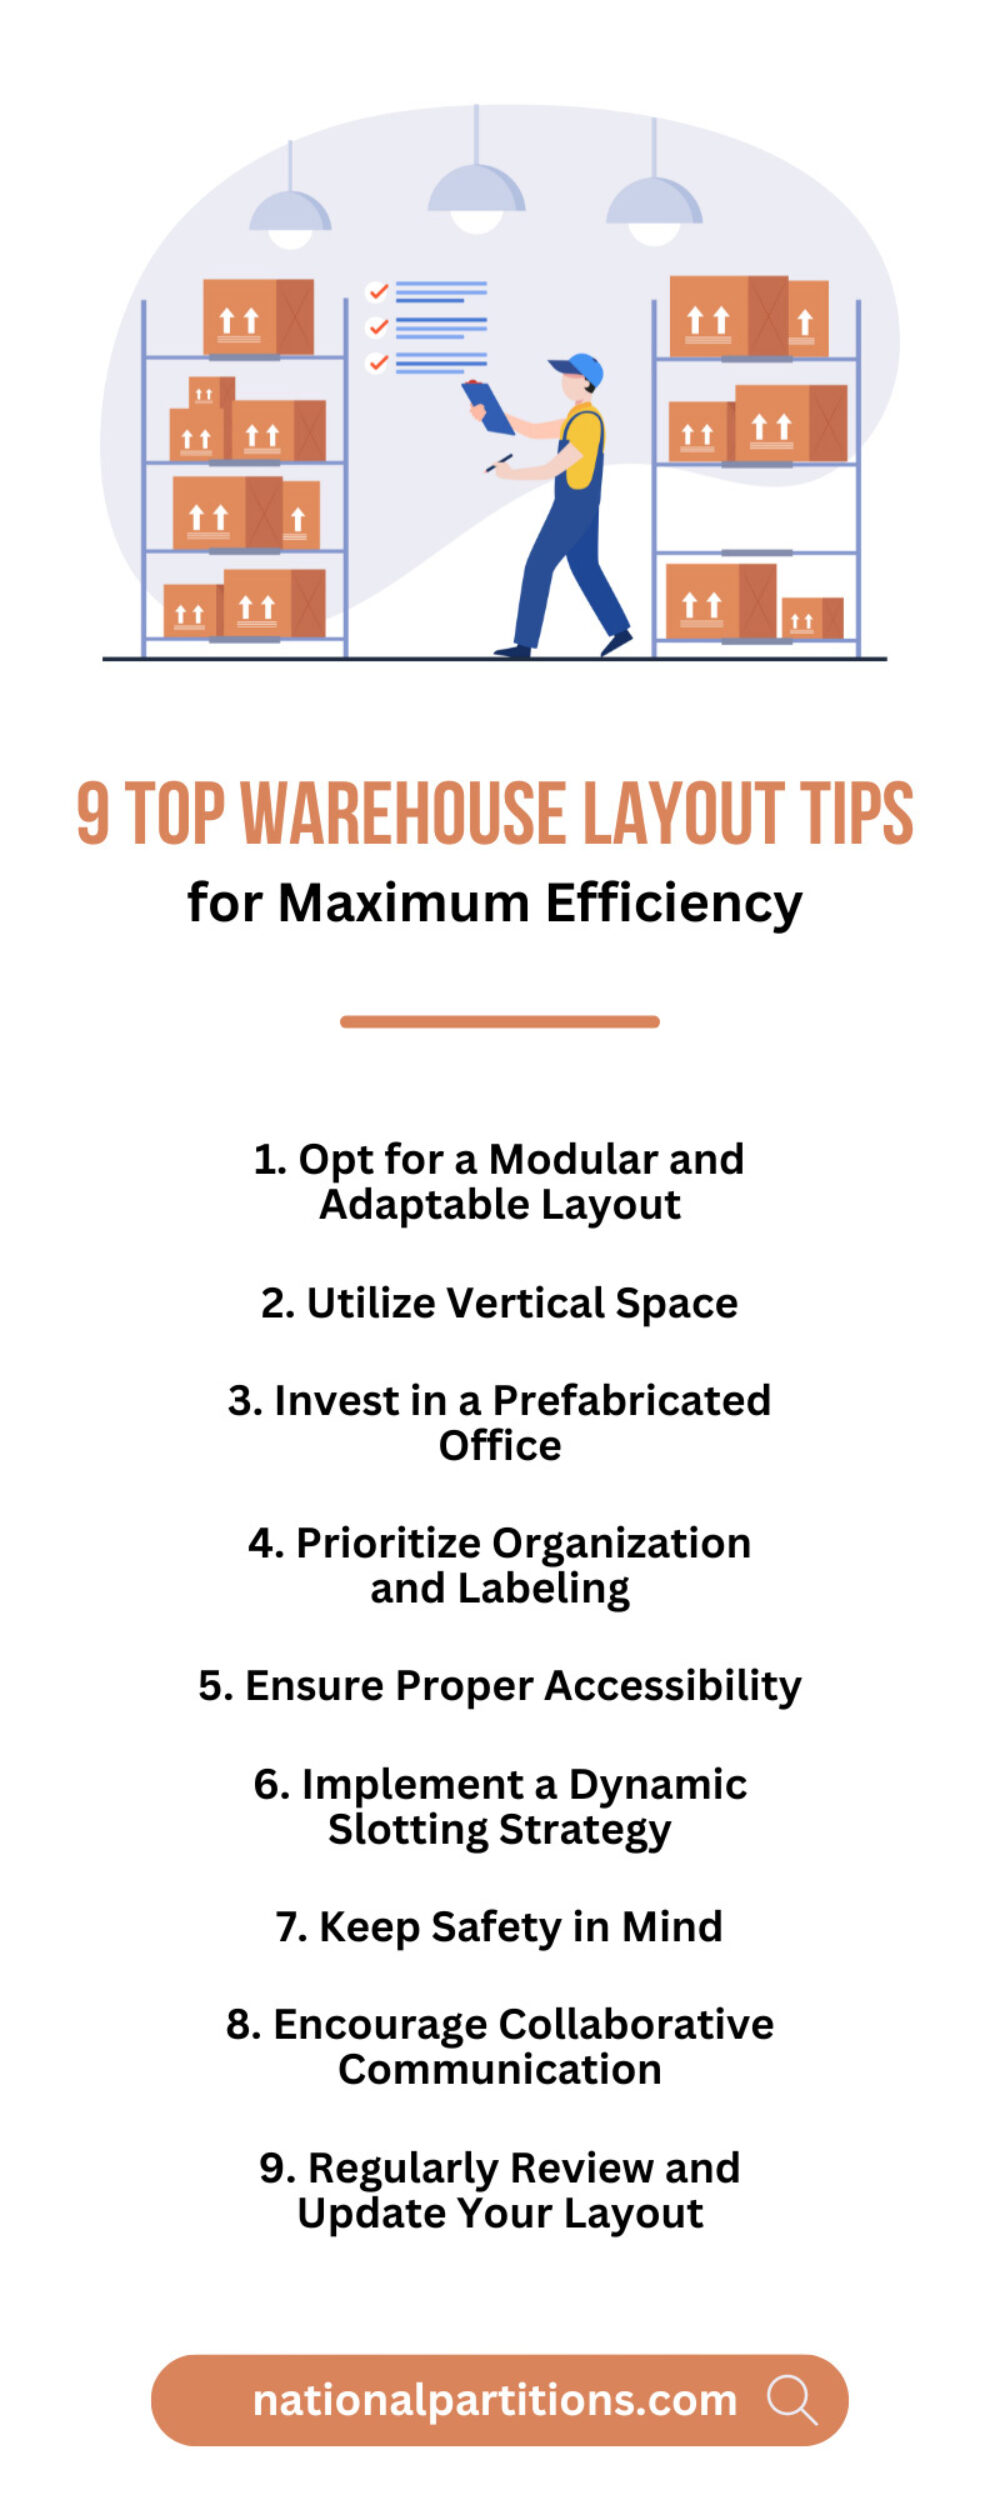 National Partitions 262856 Warehouse Layout Tips Infographic1